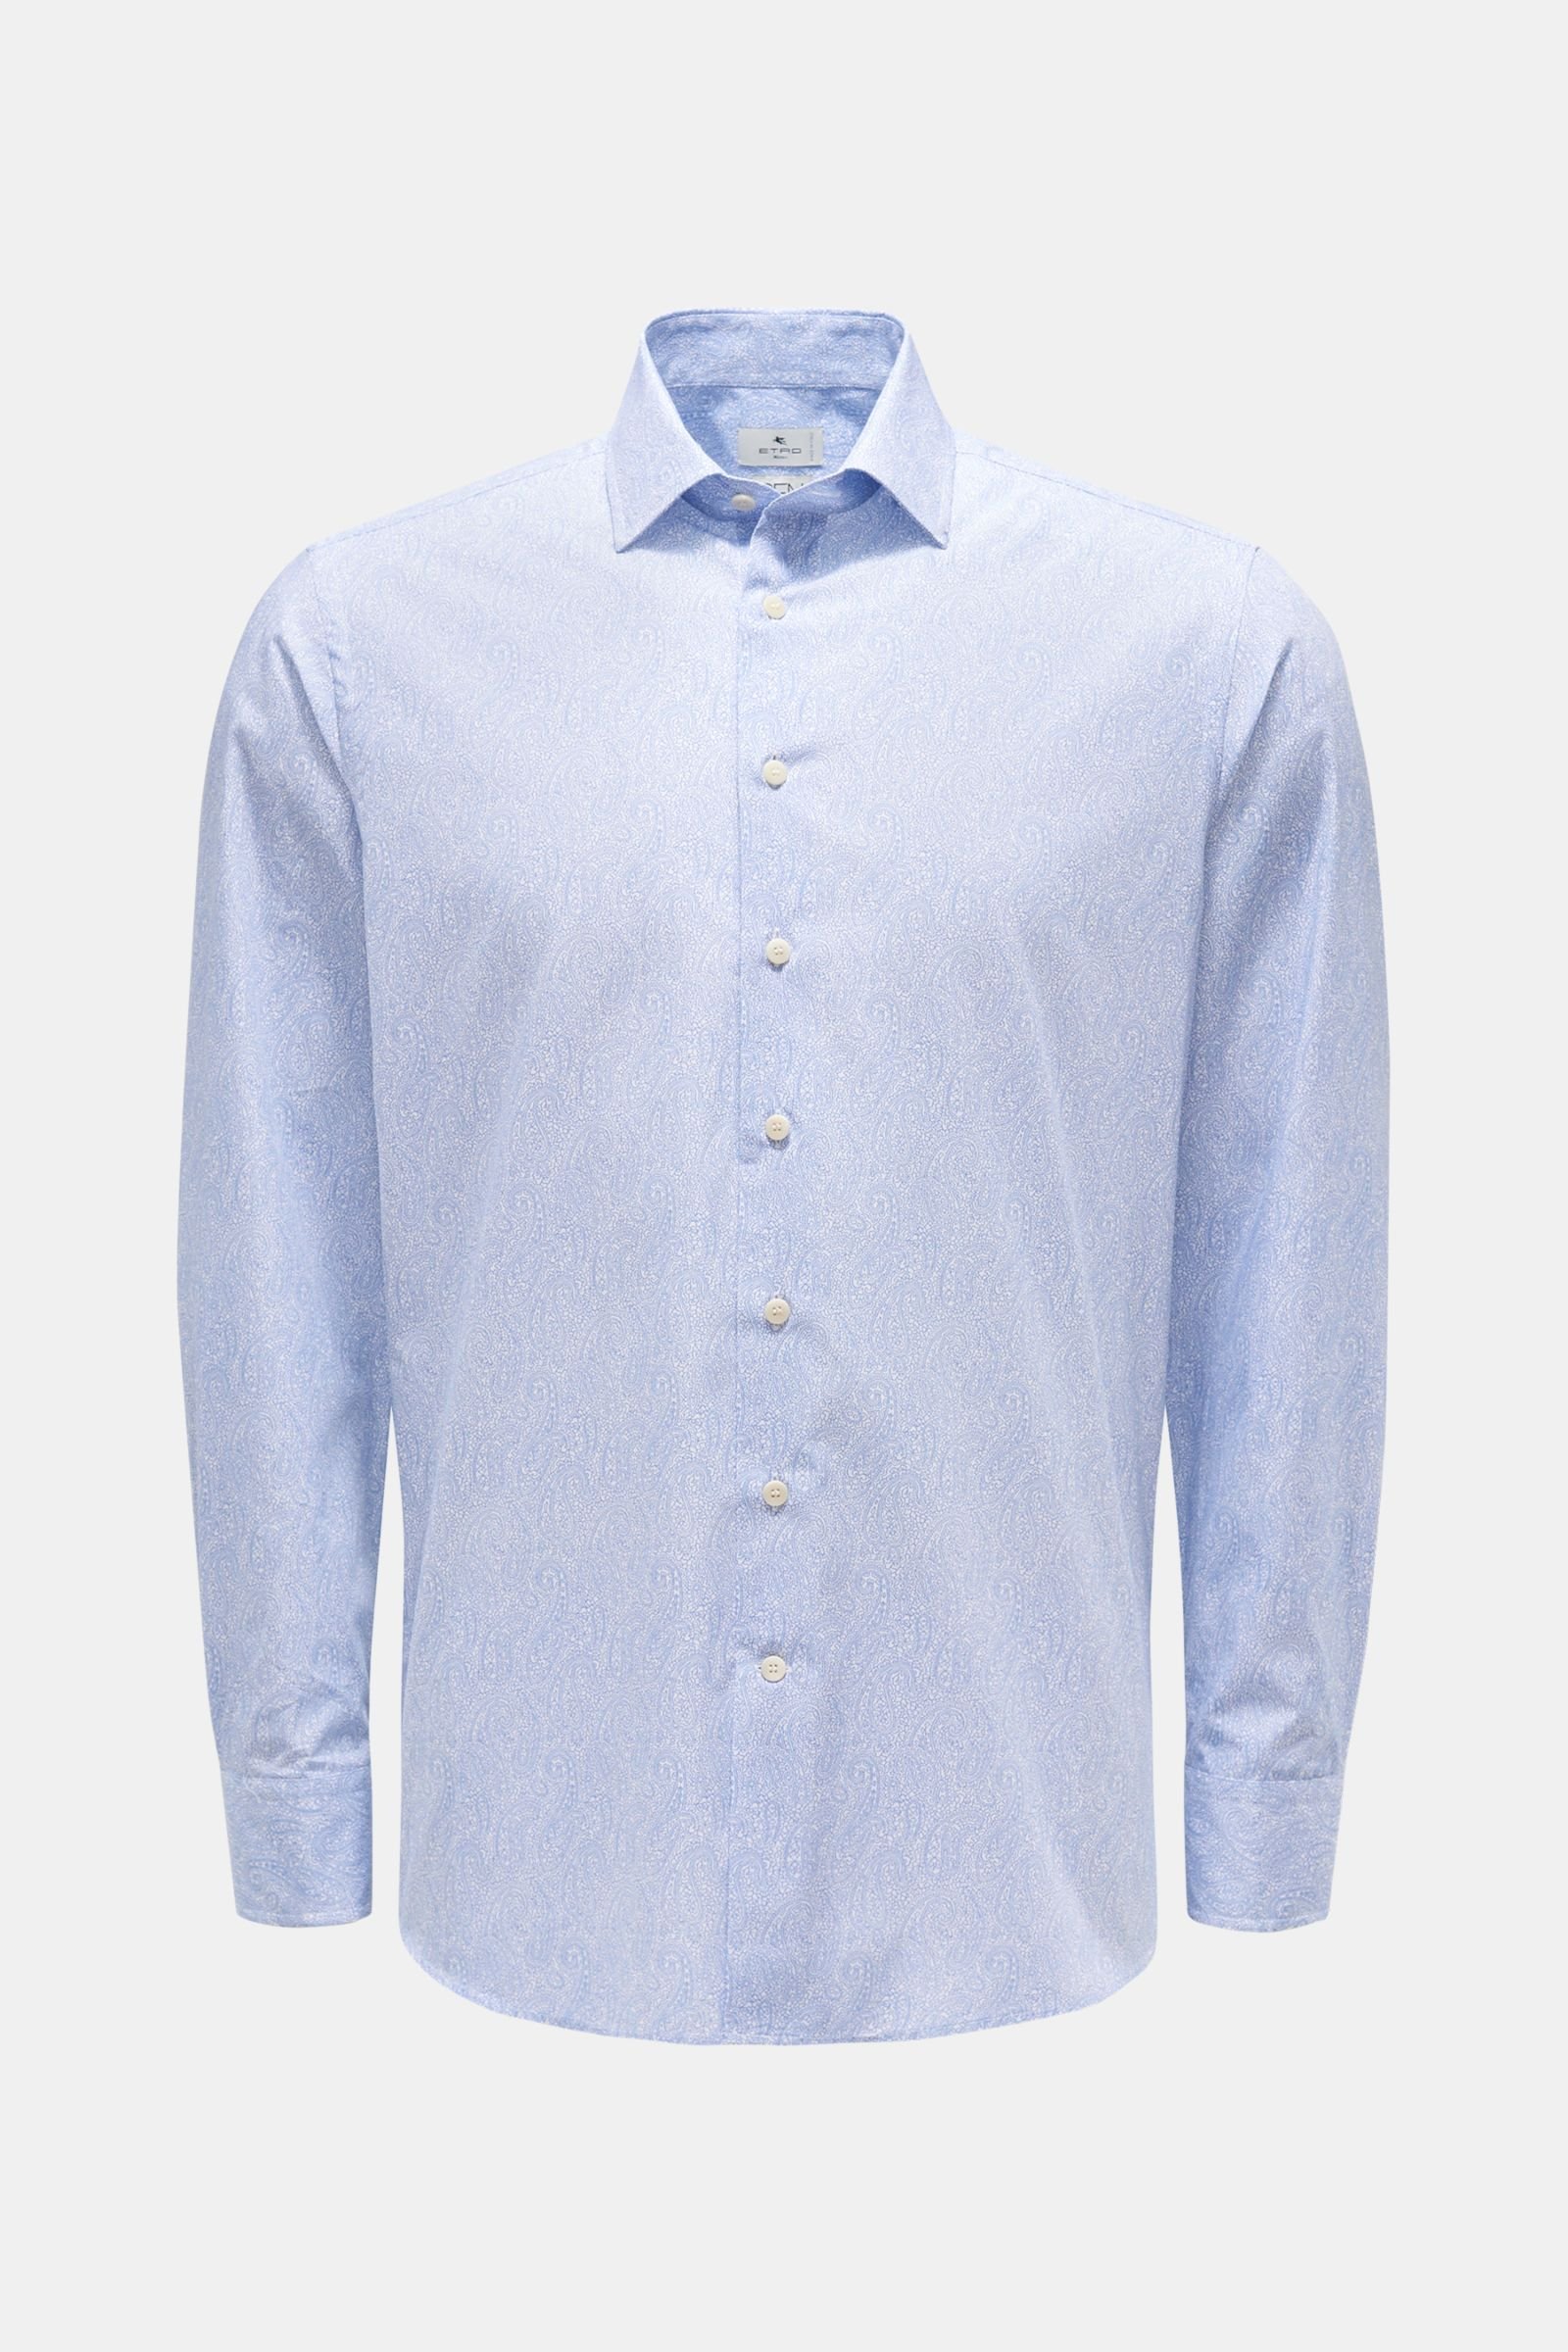 Casual shirt narrow collar blue/white patterned